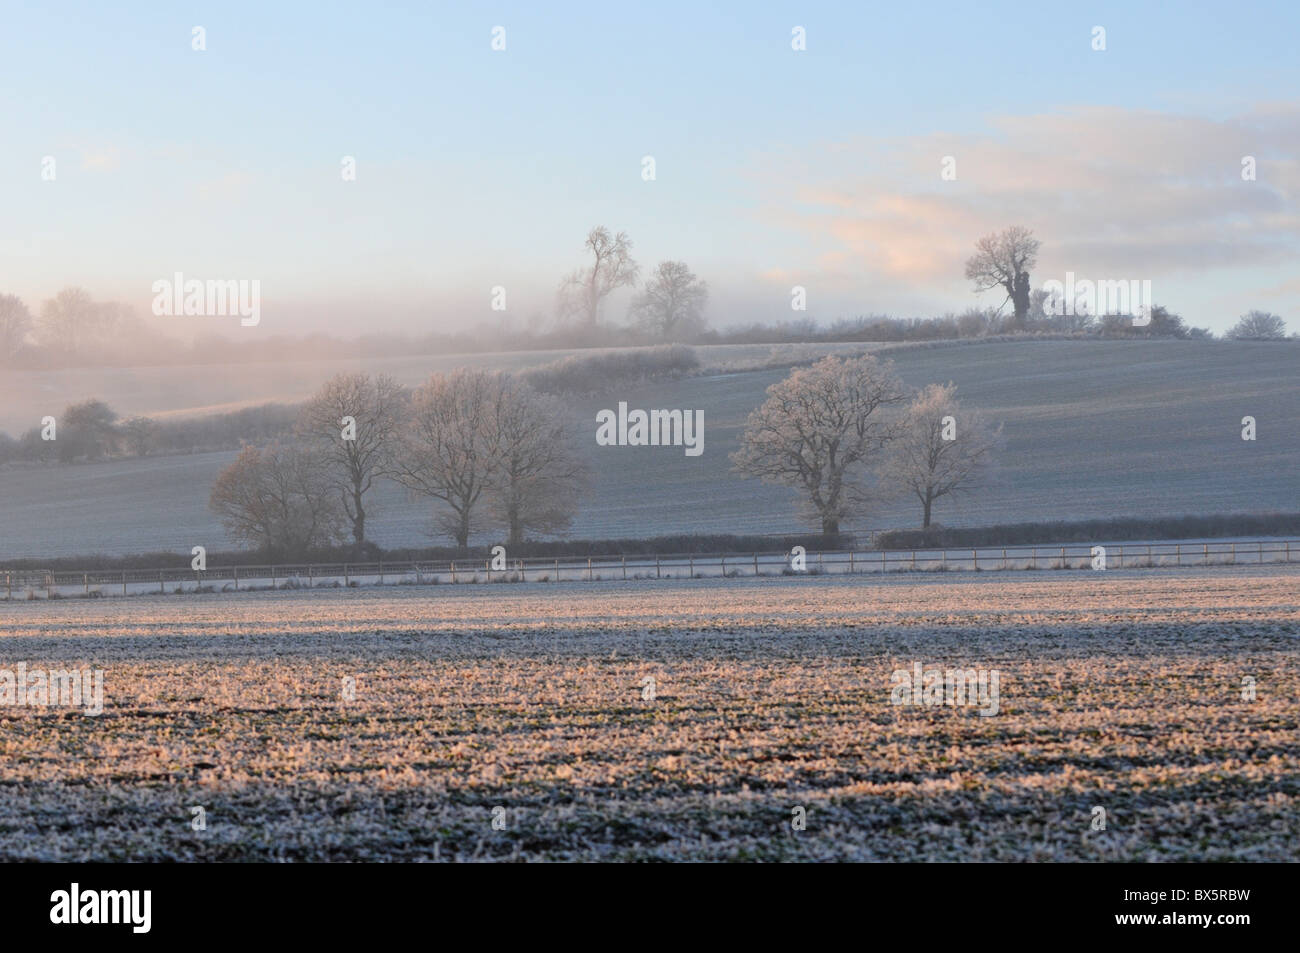 Hoar frost covered trees near Hook Norton, Oxfordshire in late afternoon mist Stock Photo